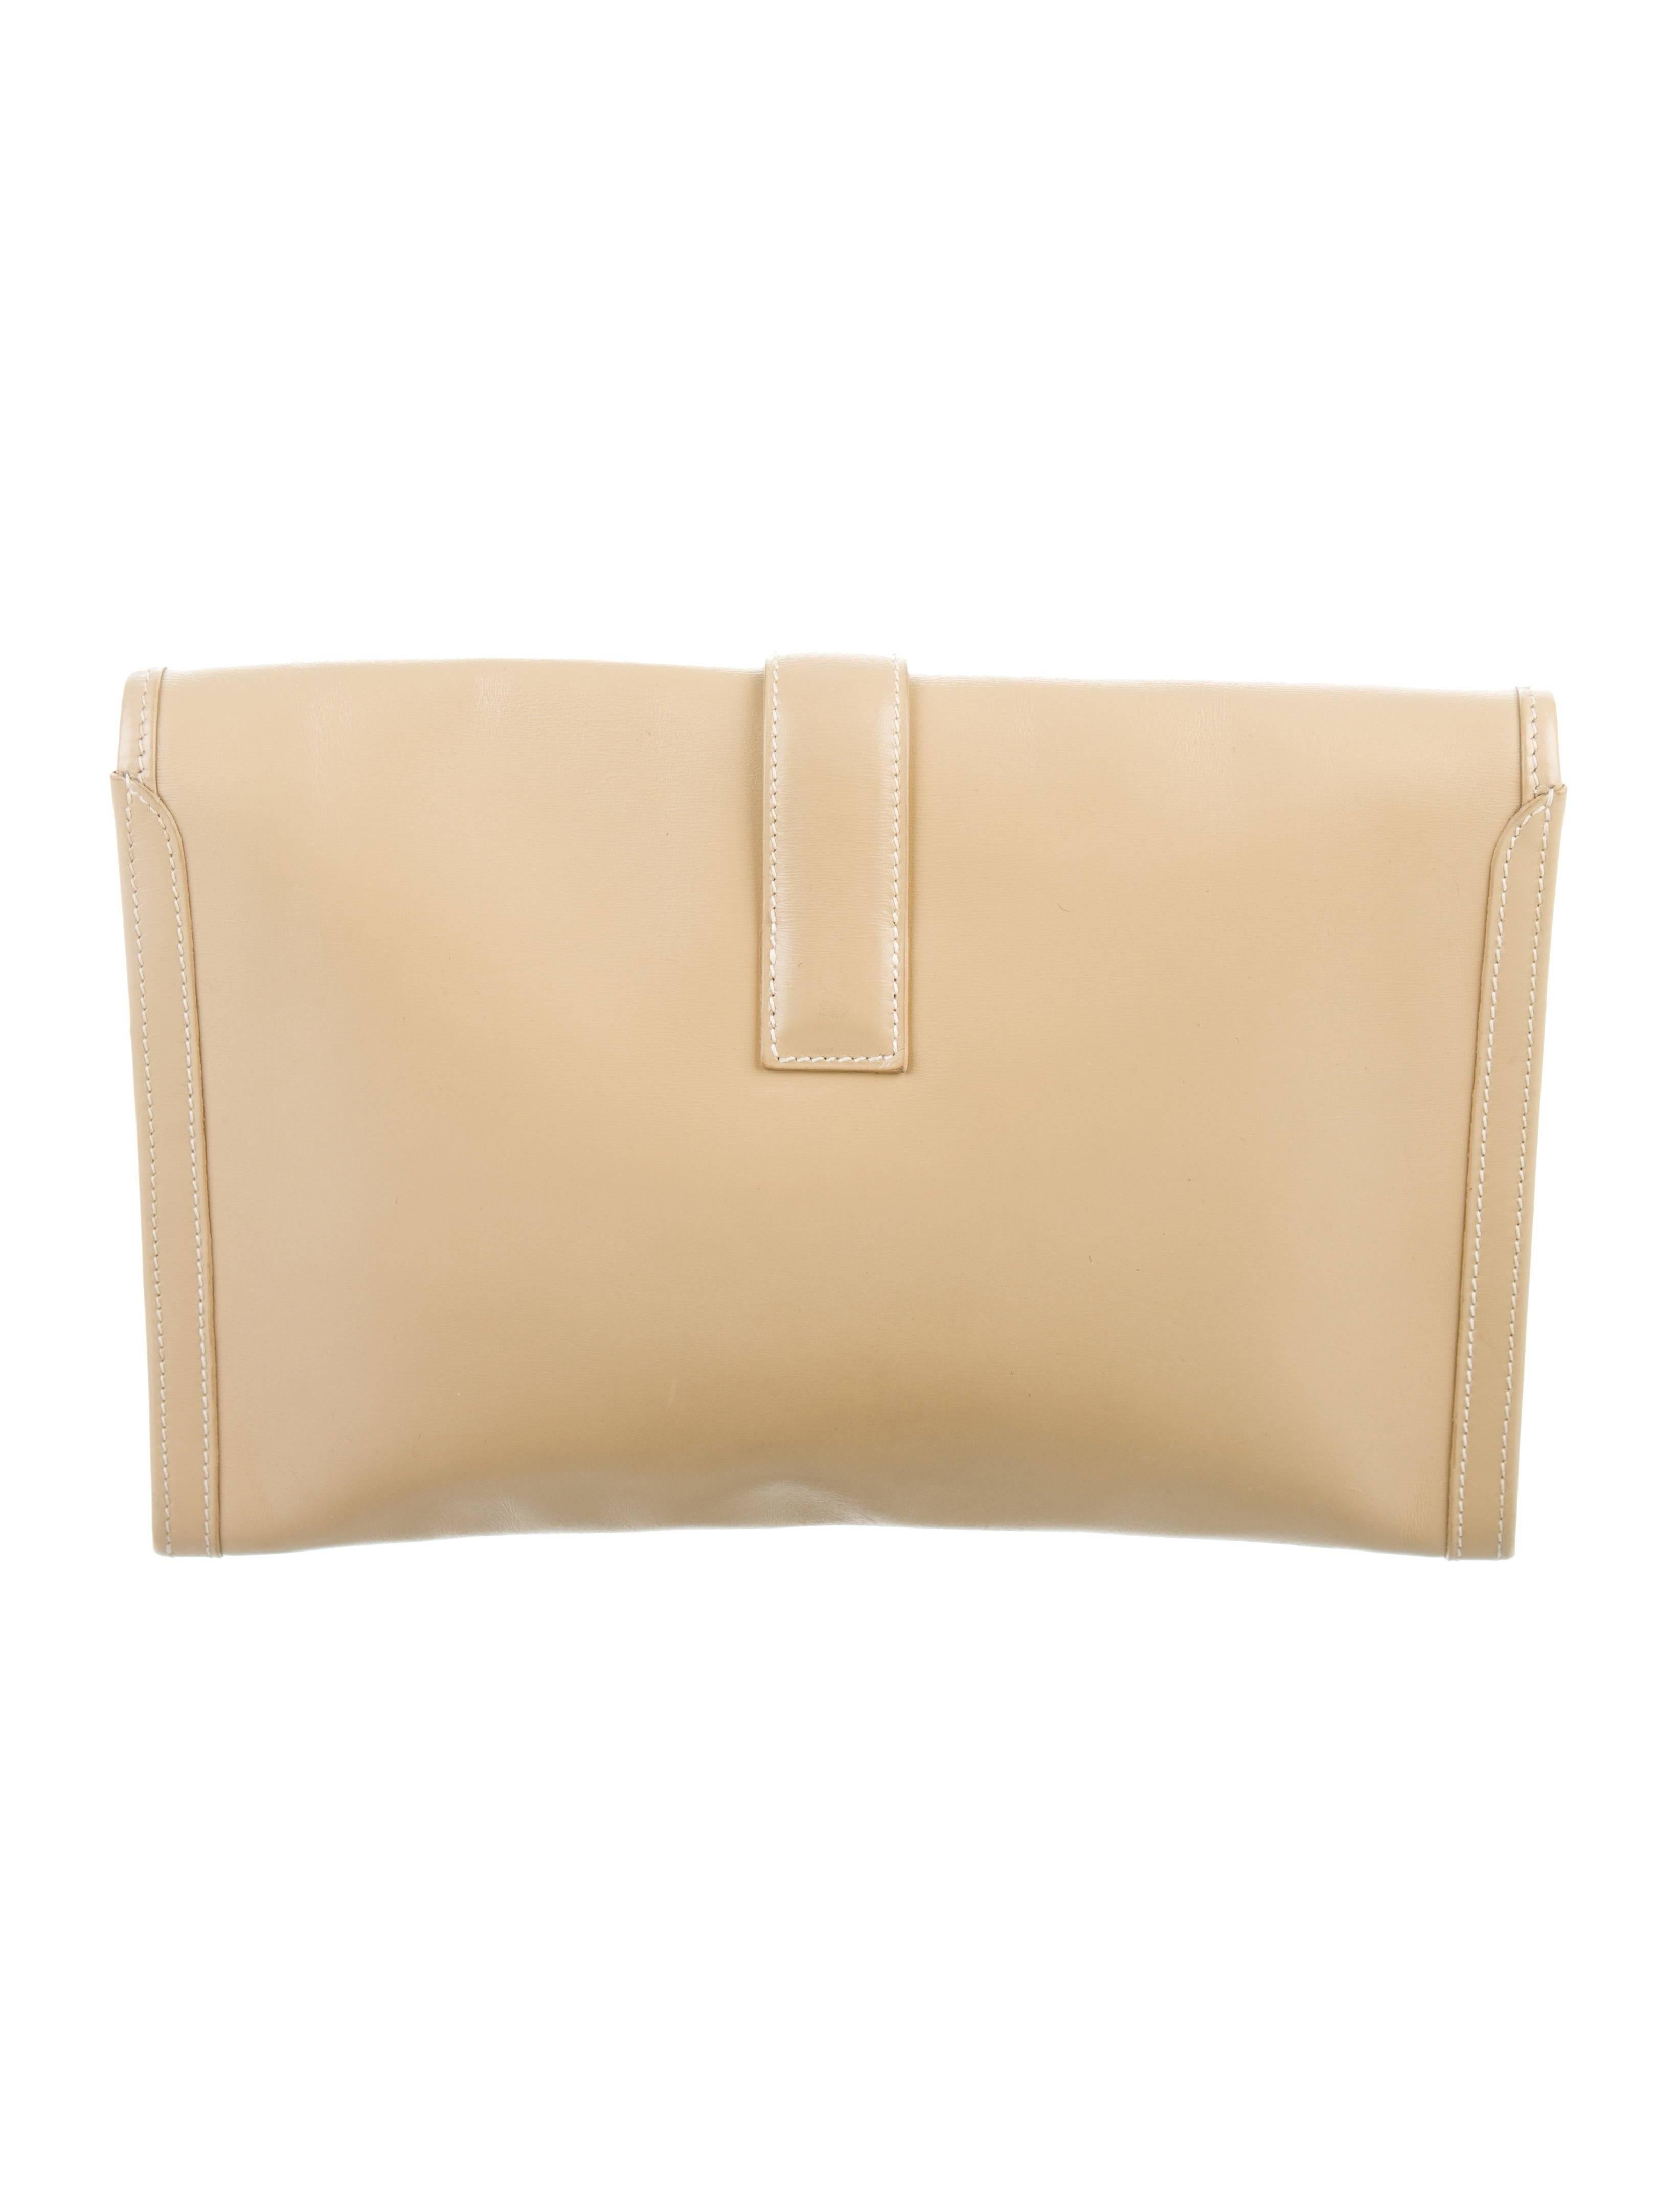 Hermes Leather Ivory Nude Leather H Logo Large Envelope Evening Clutch Flap Bag

Leather
Canvas lining 
Pull through closure
Date code present 
Made in France 
Measures 11" W x 7.5" H x 1" D